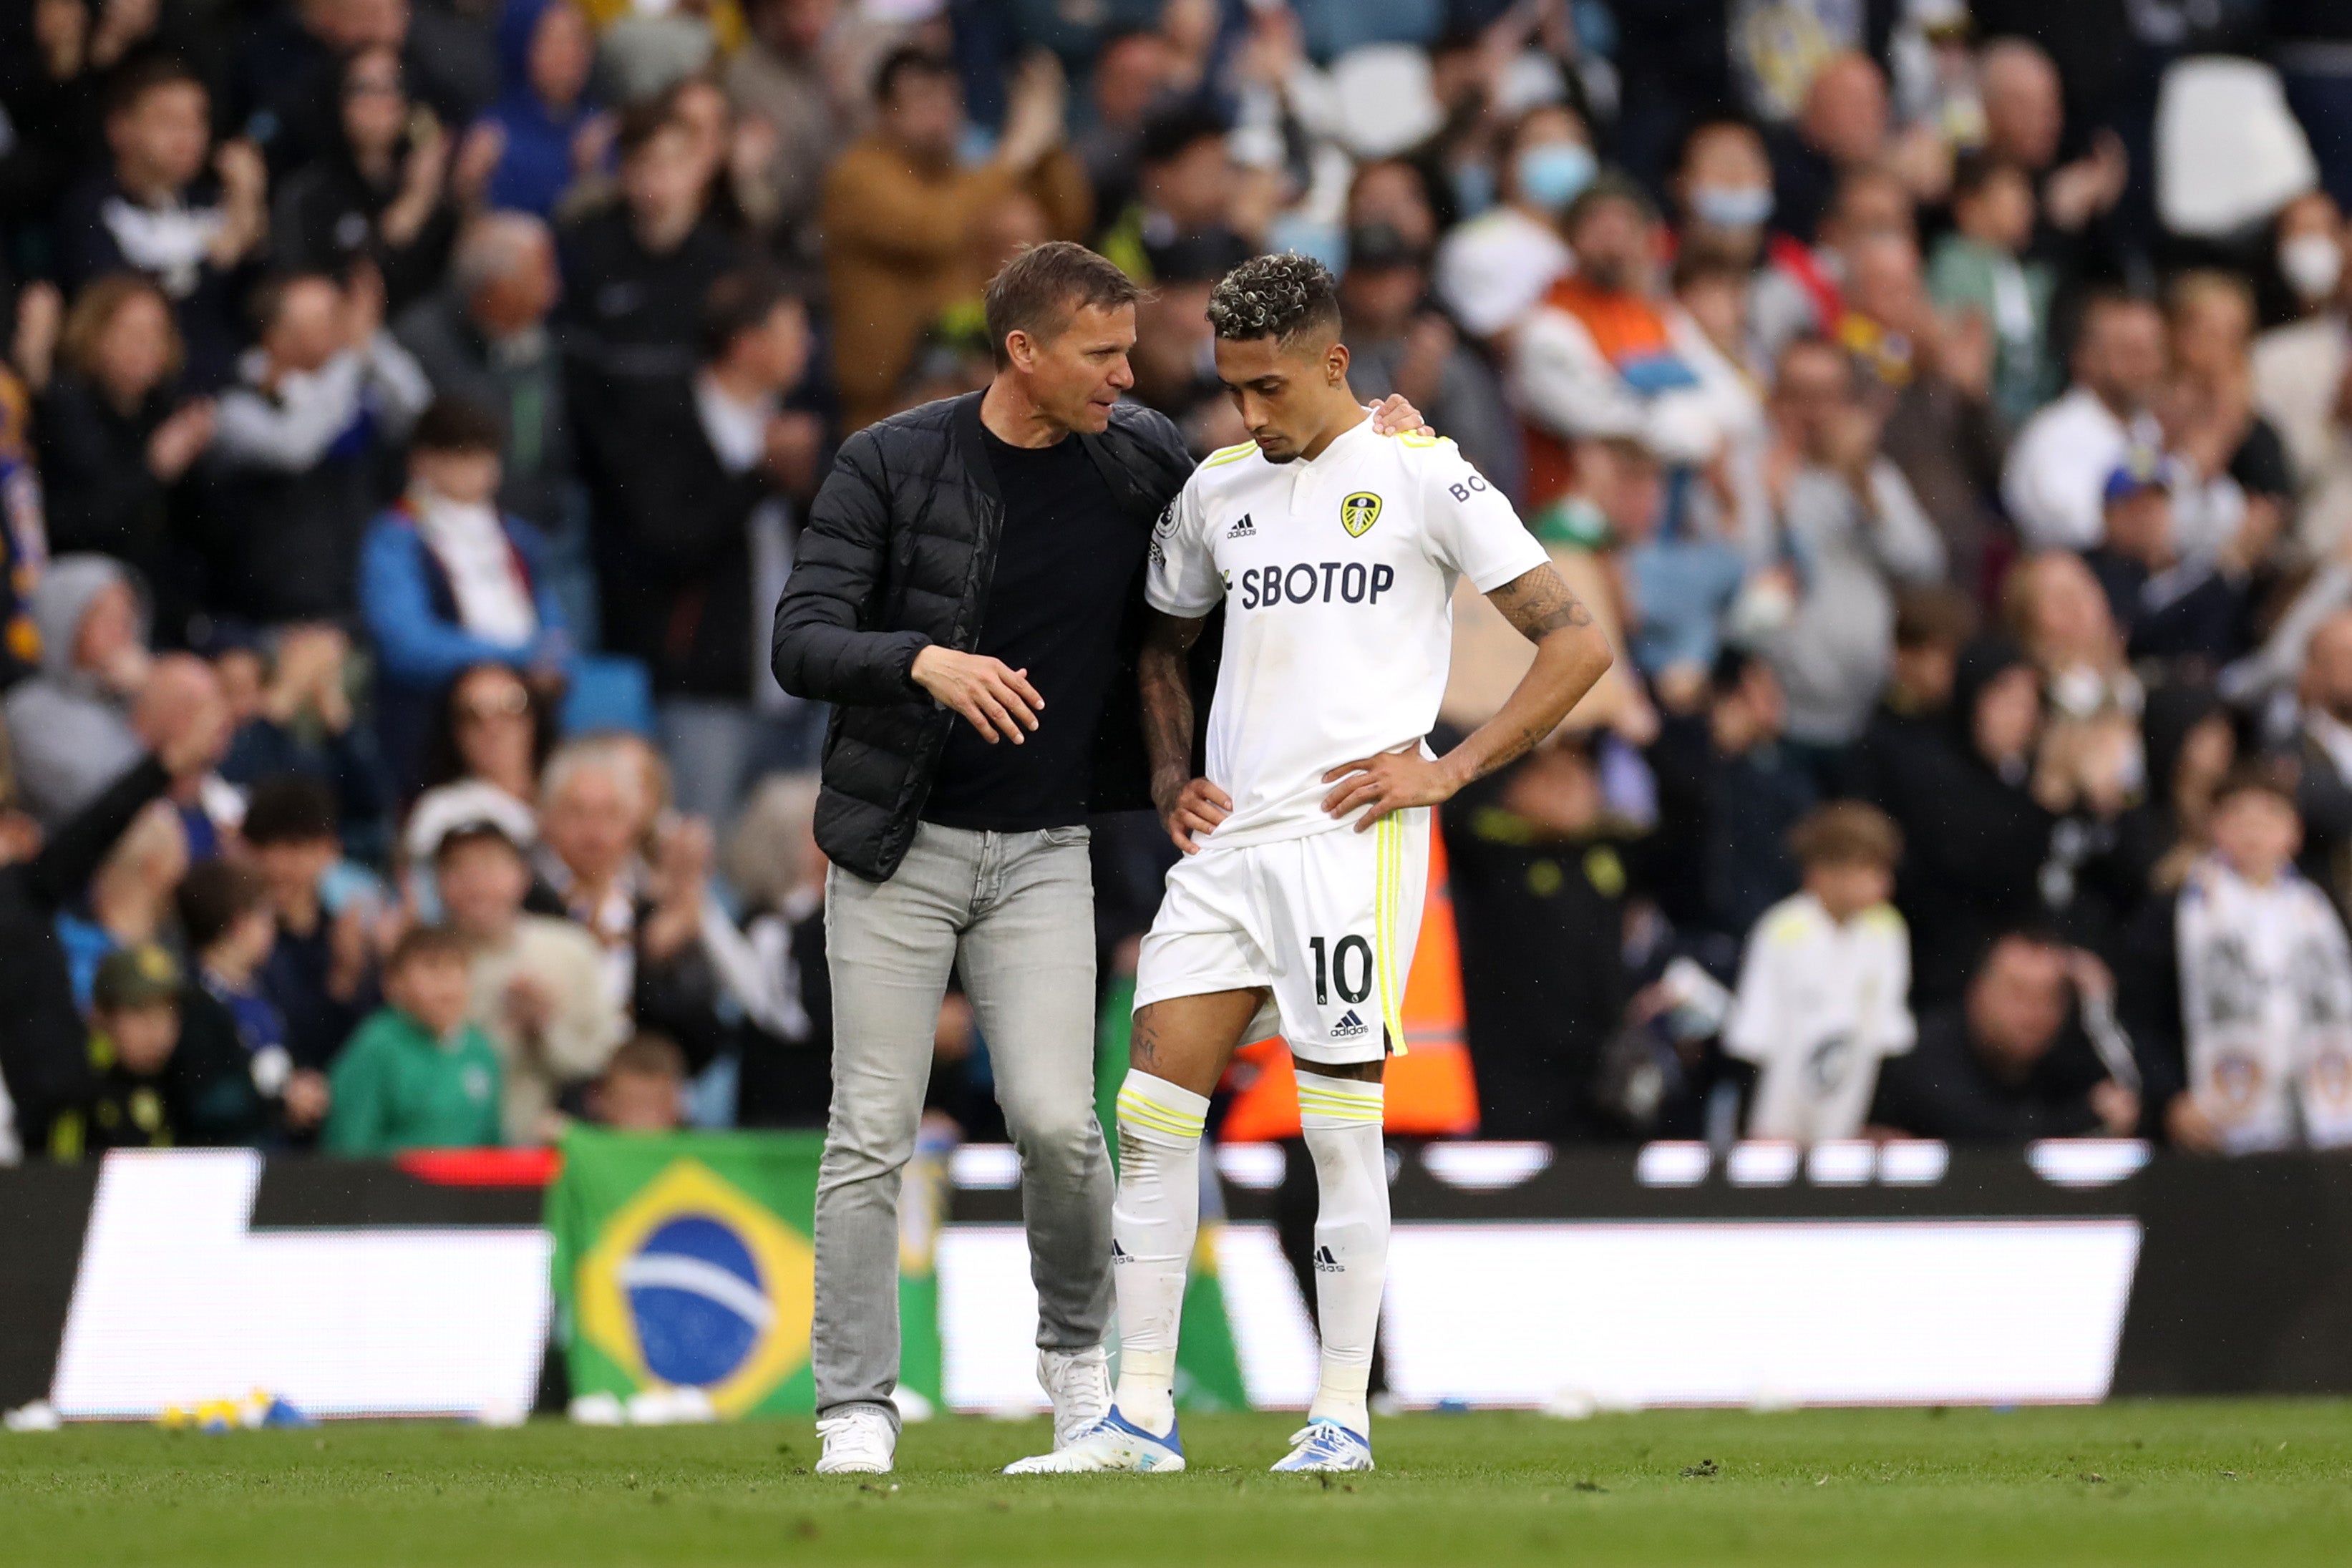 Leeds boss Jesse Marsch gave his blessing for Raphinha to depart